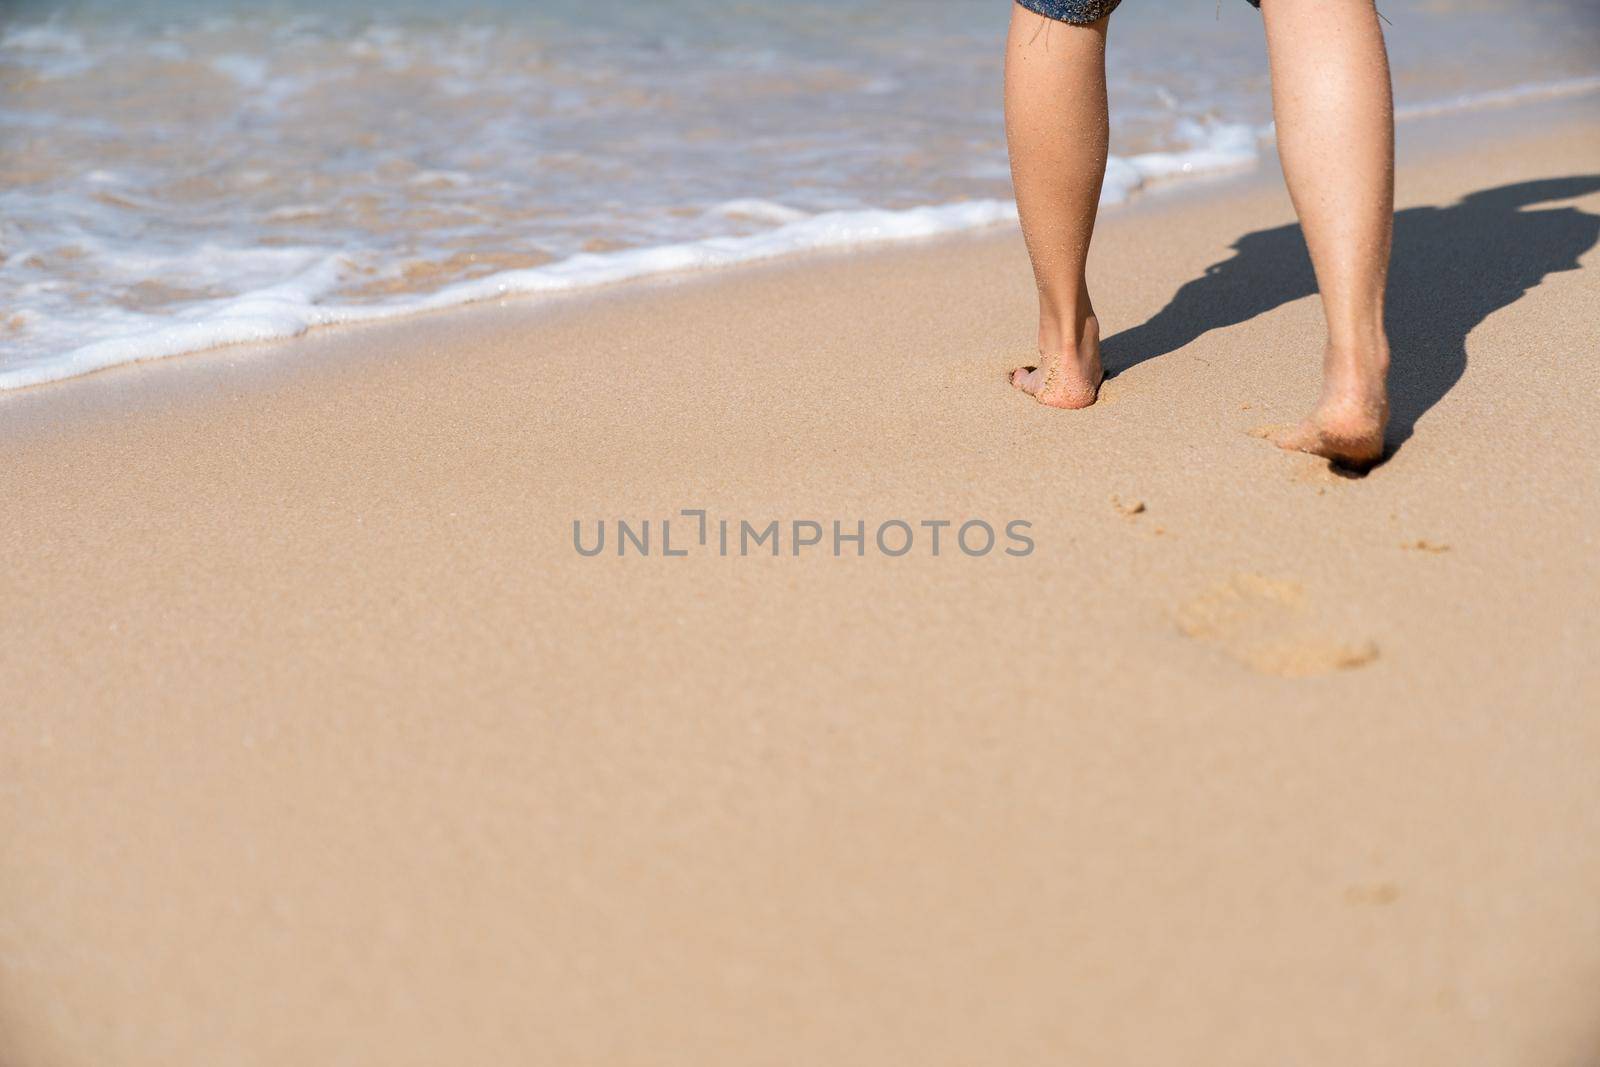 Footprints in the sand on the beach. Woman walking to the sea.